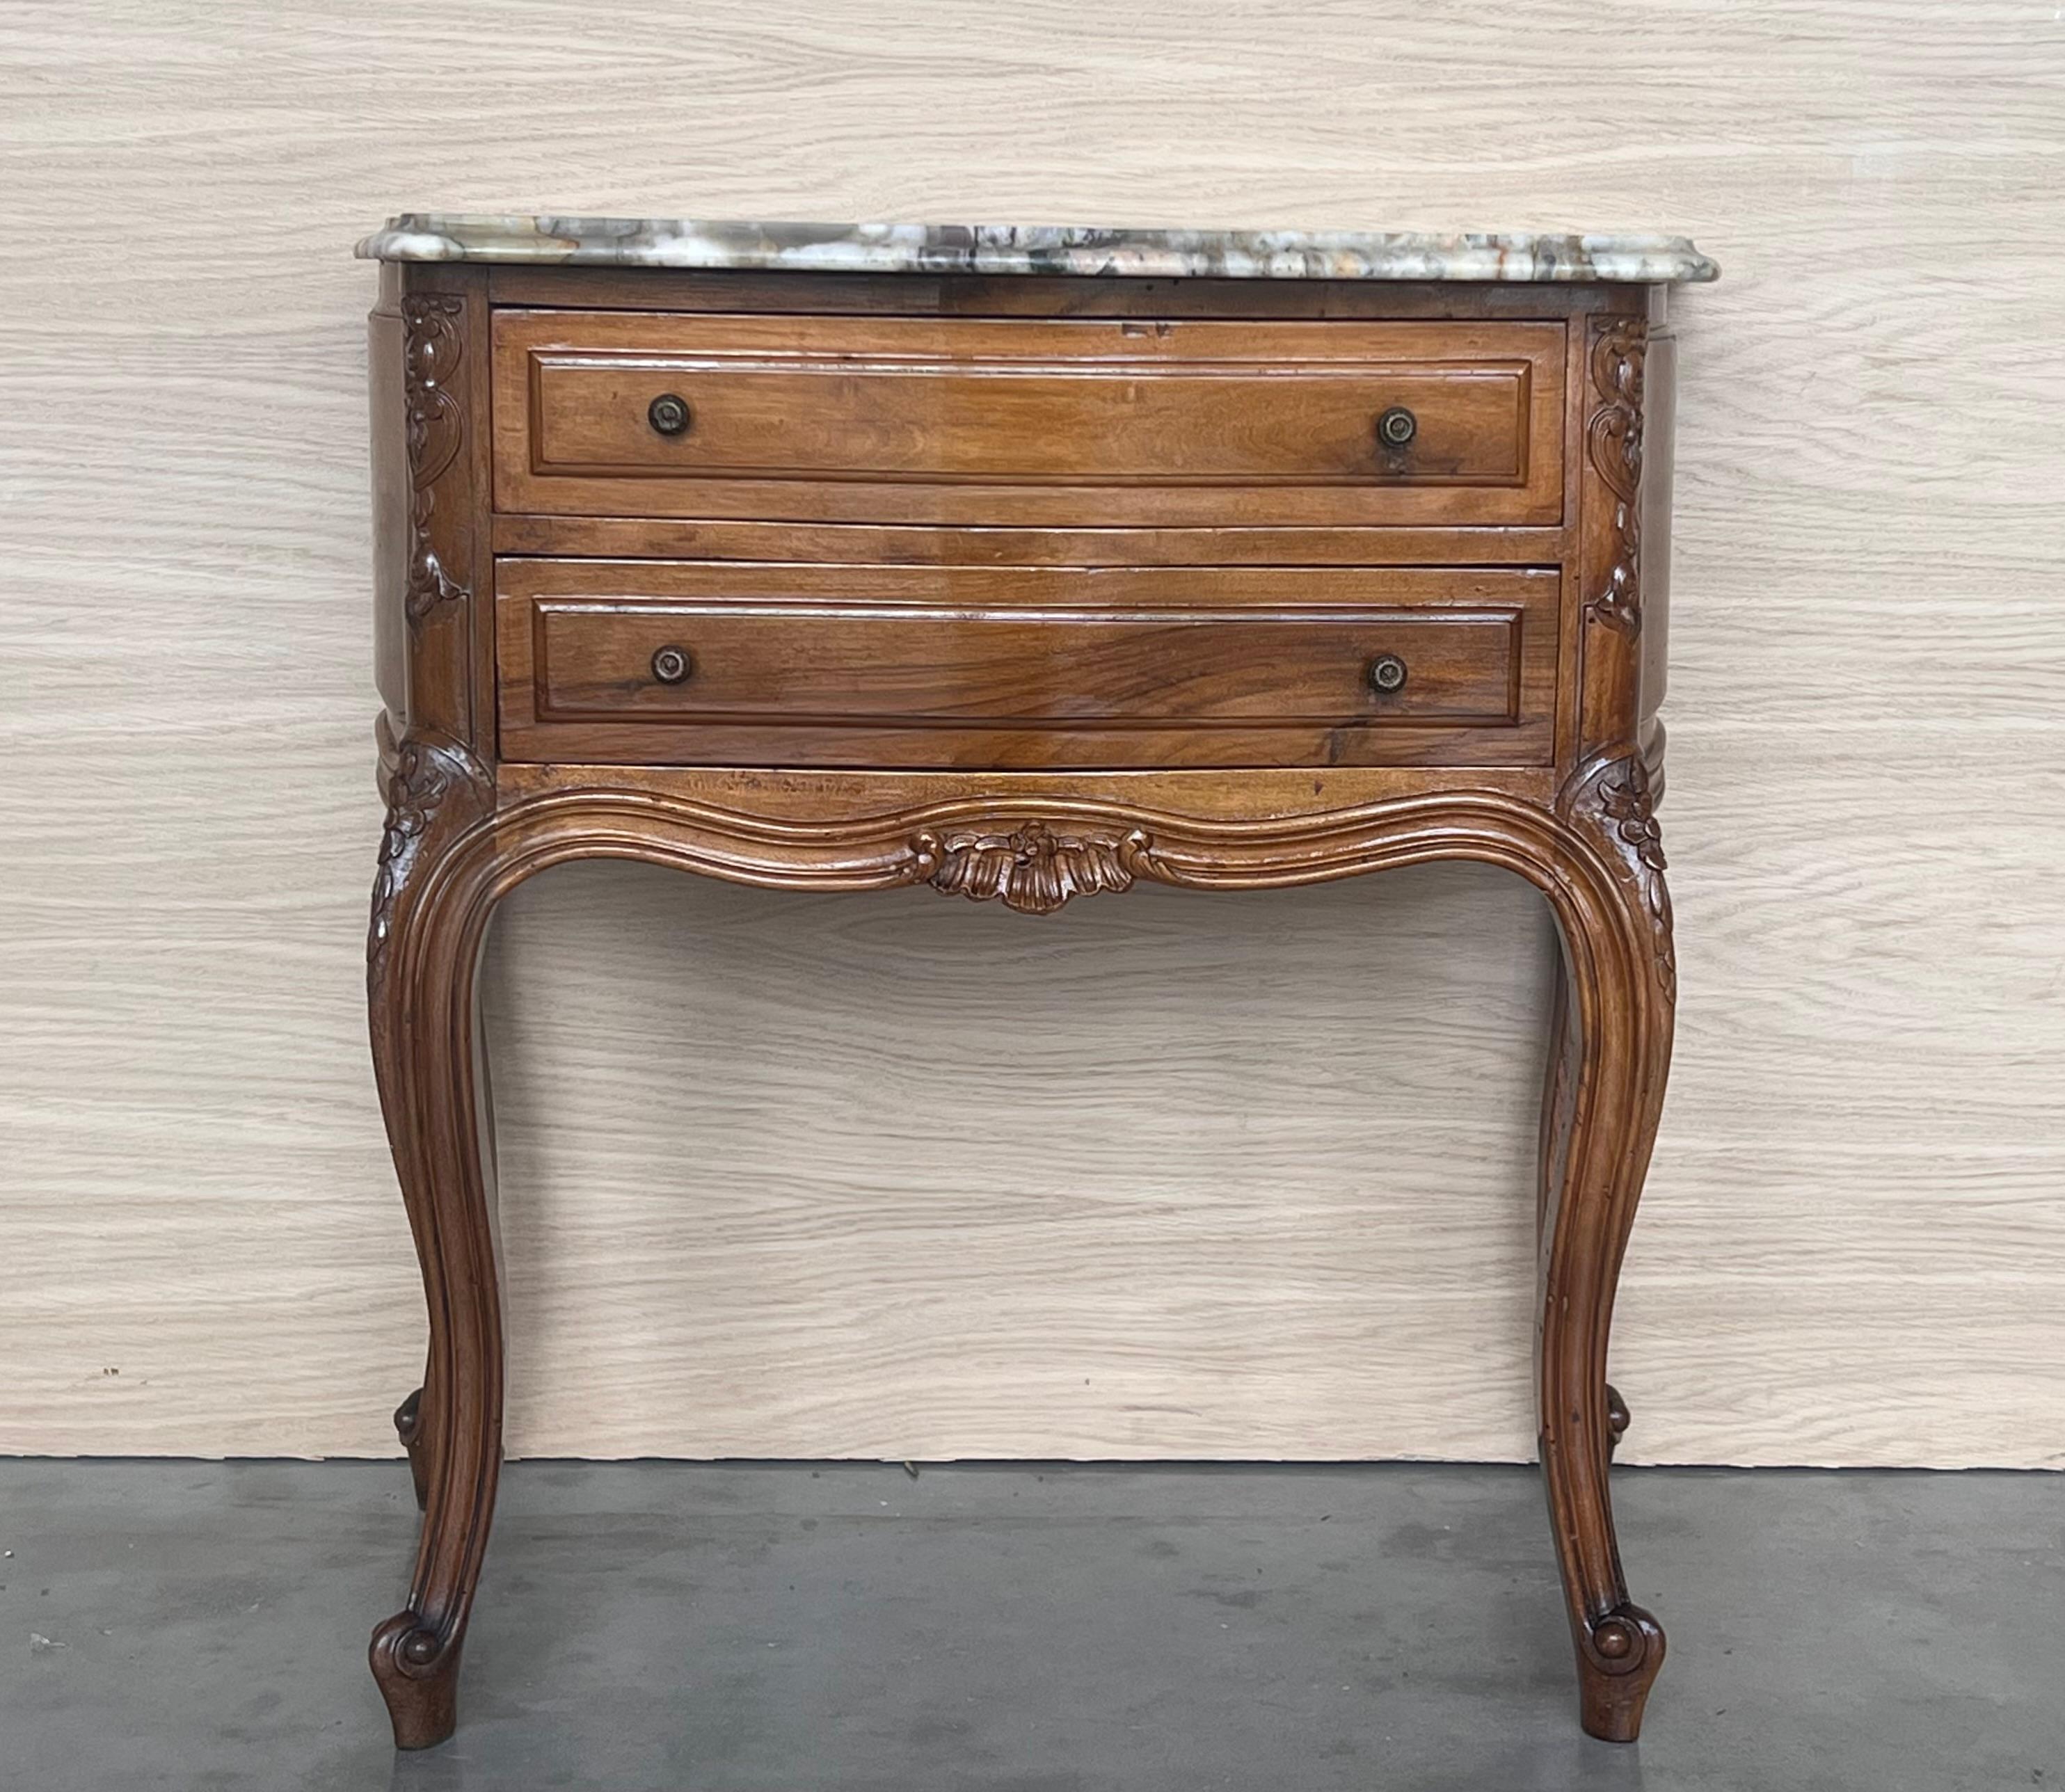 We are delighted to introduce this pair of French walnut nightstands.
The front drawers have this beautiful burr in the wood, with original handles to open all the drawers and white marble top.
Also, the legs are very well carved and shaped.

We